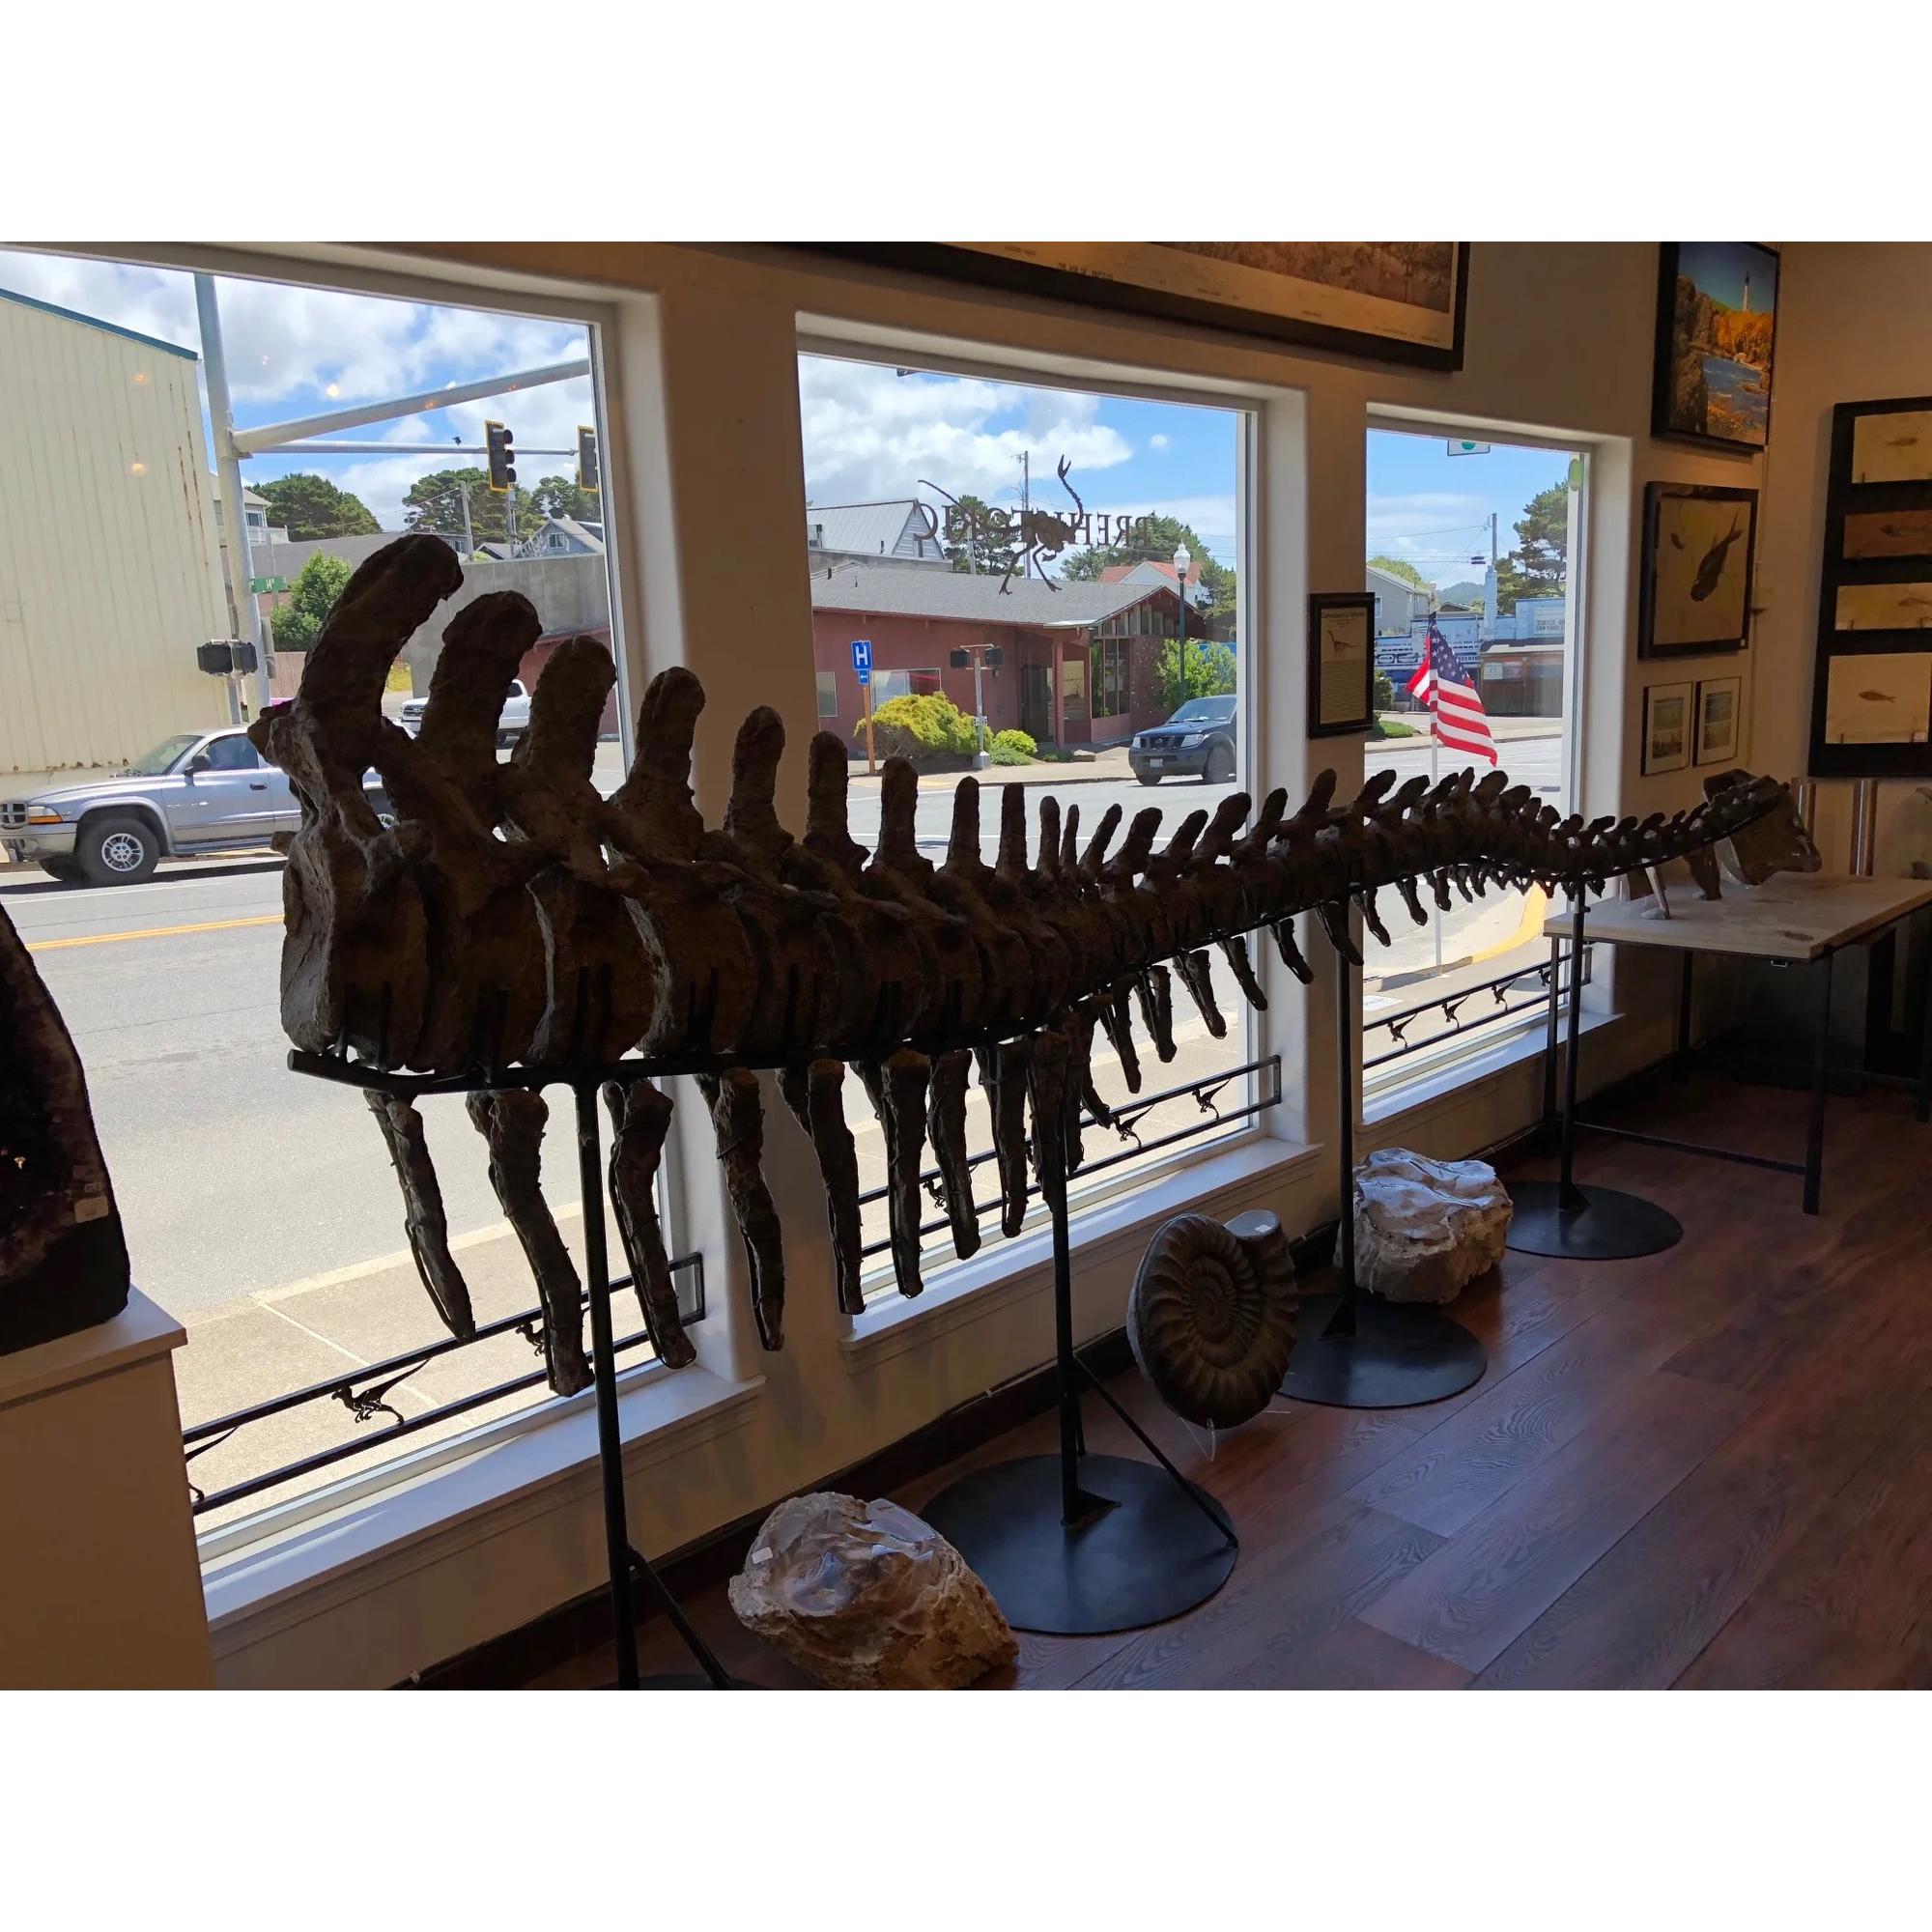 Camarasaurus Grandis tail for sale in Lincoln City, Oregon. This tail is very complete and very impressive.